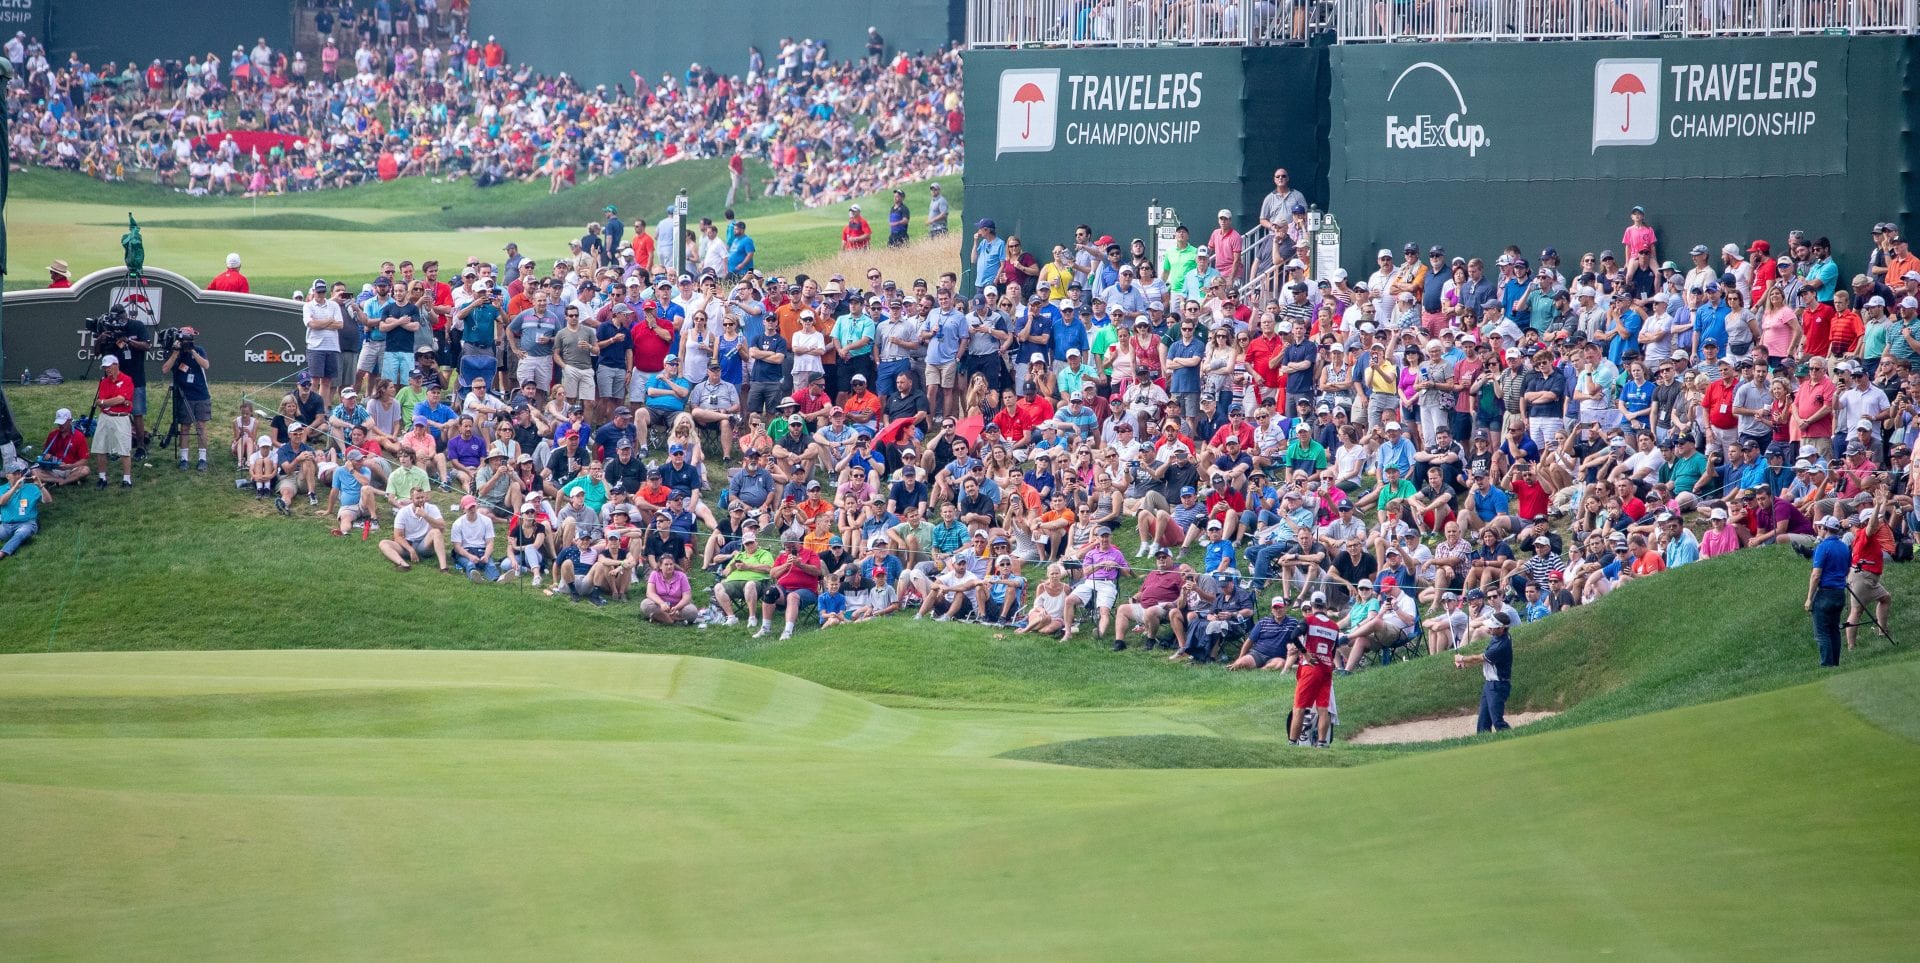 TRAVELERS CHAMPIONSHIP WINS ‘PLAYERS CHOICE’ AWARD FROM PGA TOUR FOR